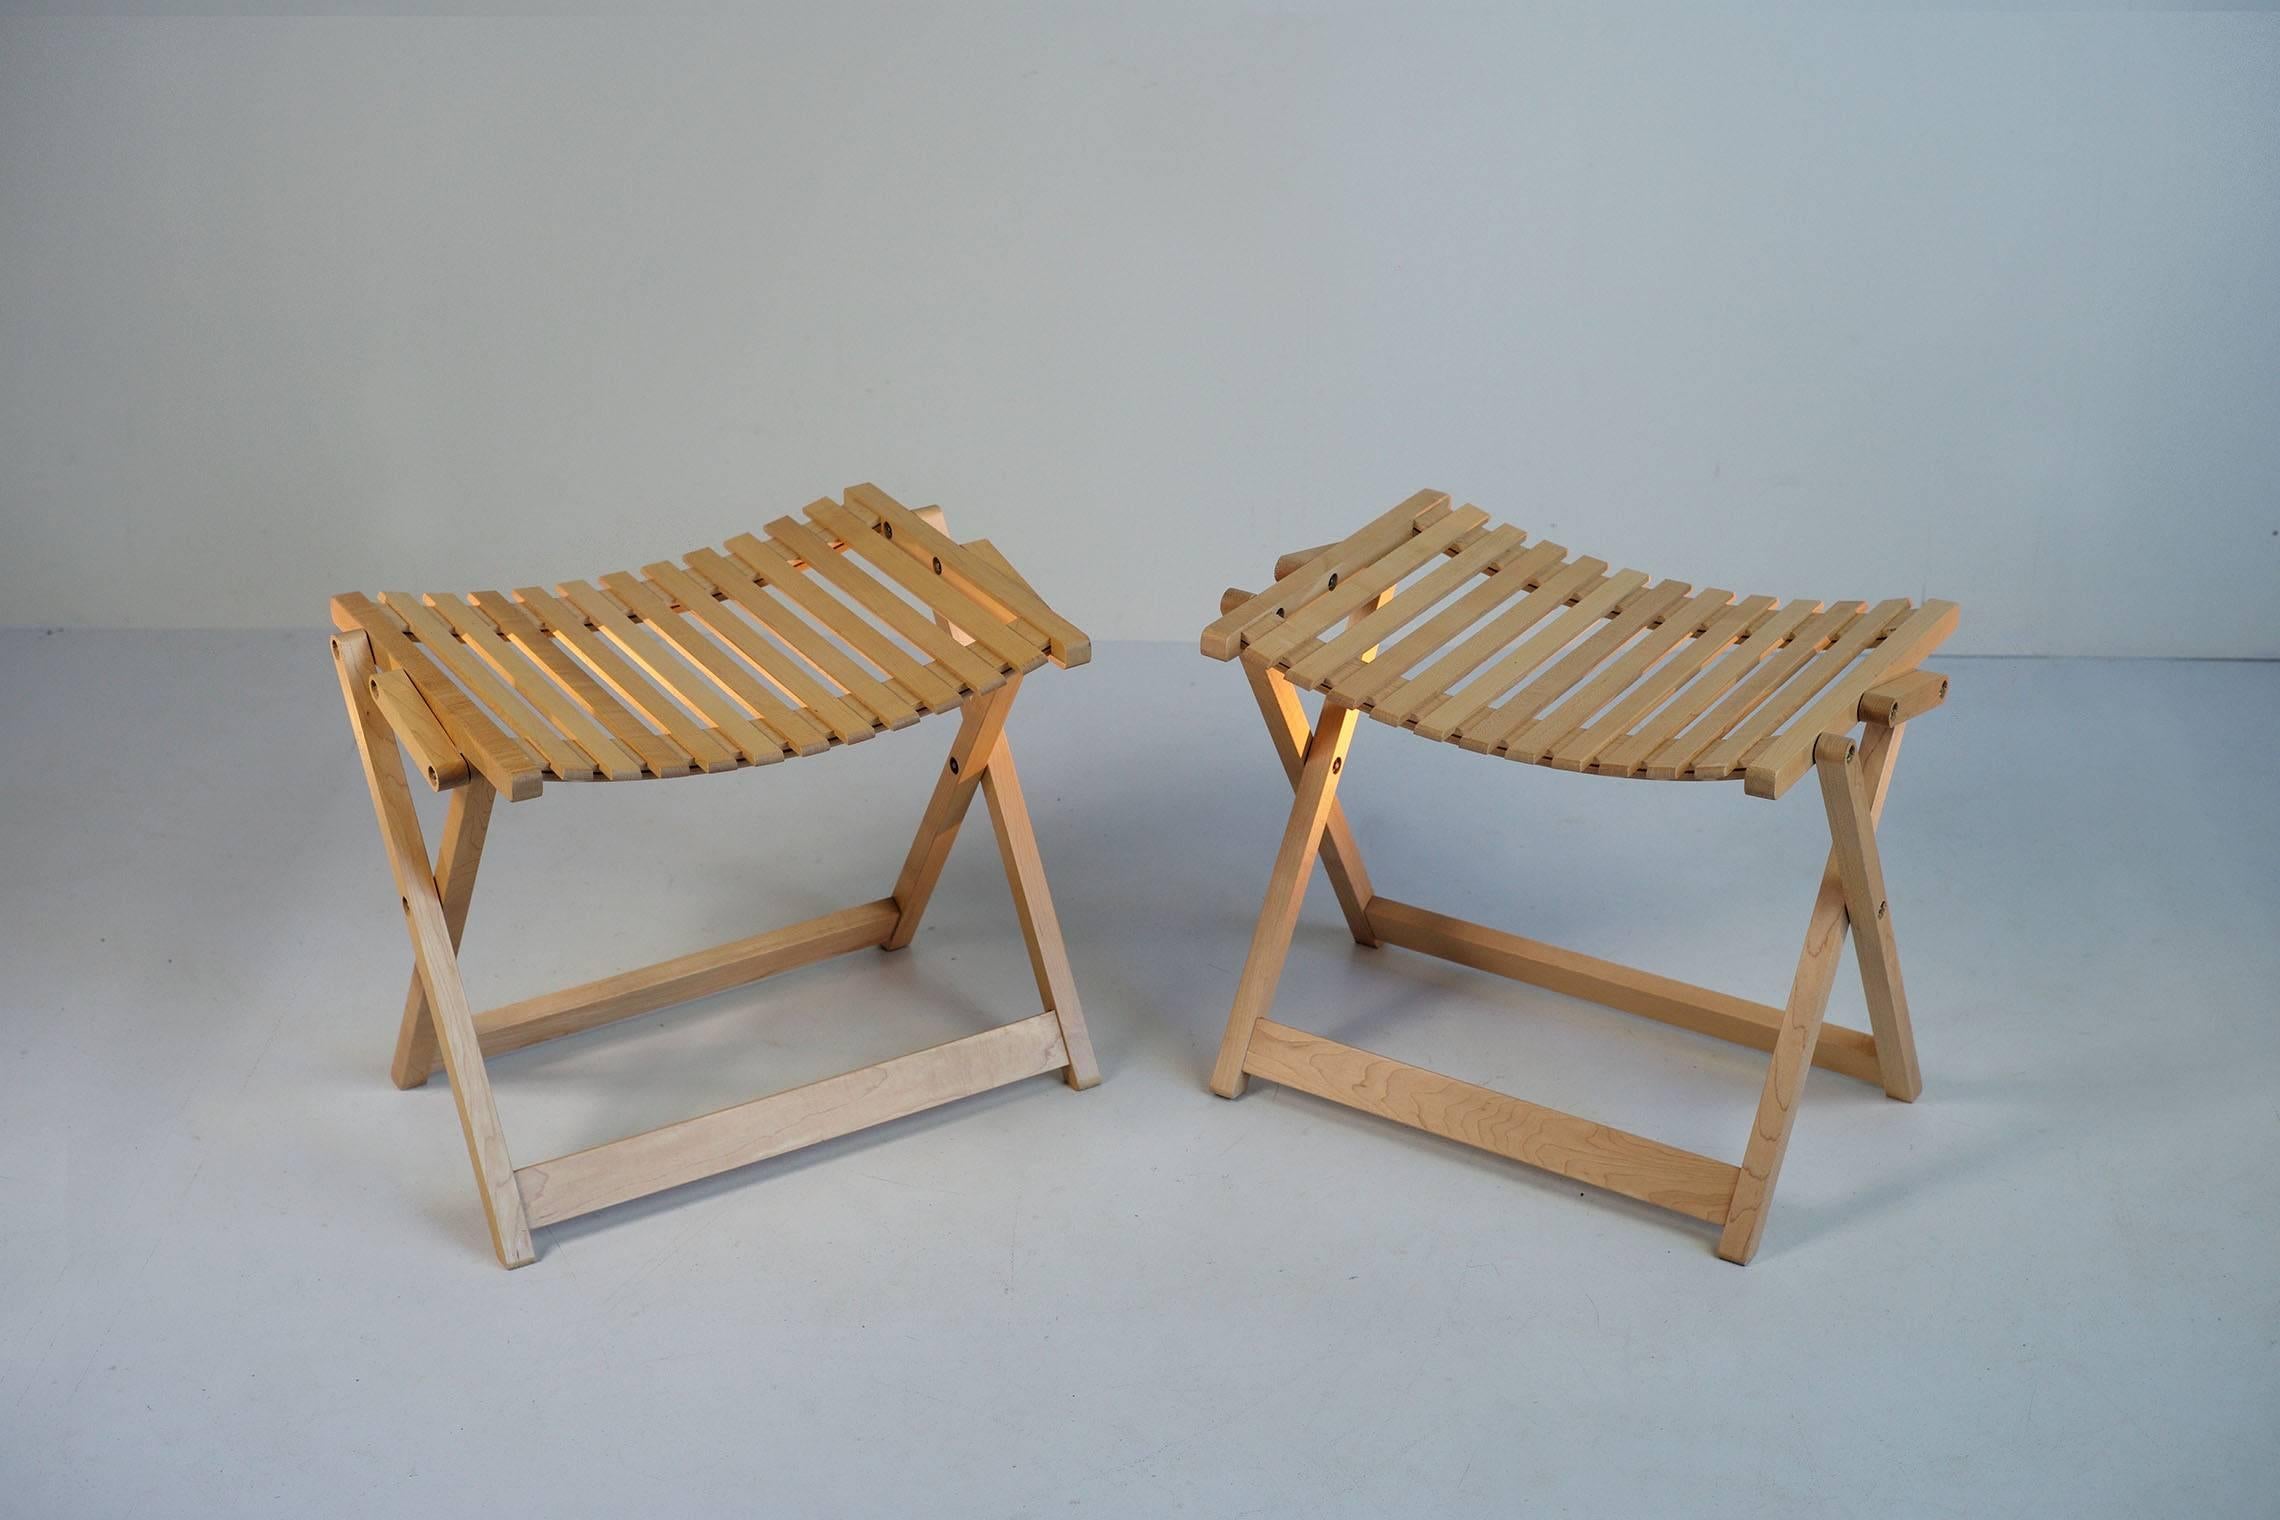 Designed by Jean-Claude Duboys in the 1970s, Program A was created in the early 1980s by Maison Attitude. It consists of a set of solid maple furniture, folding and modular (see documentation). Comfortable, of a remarkable design, this furniture